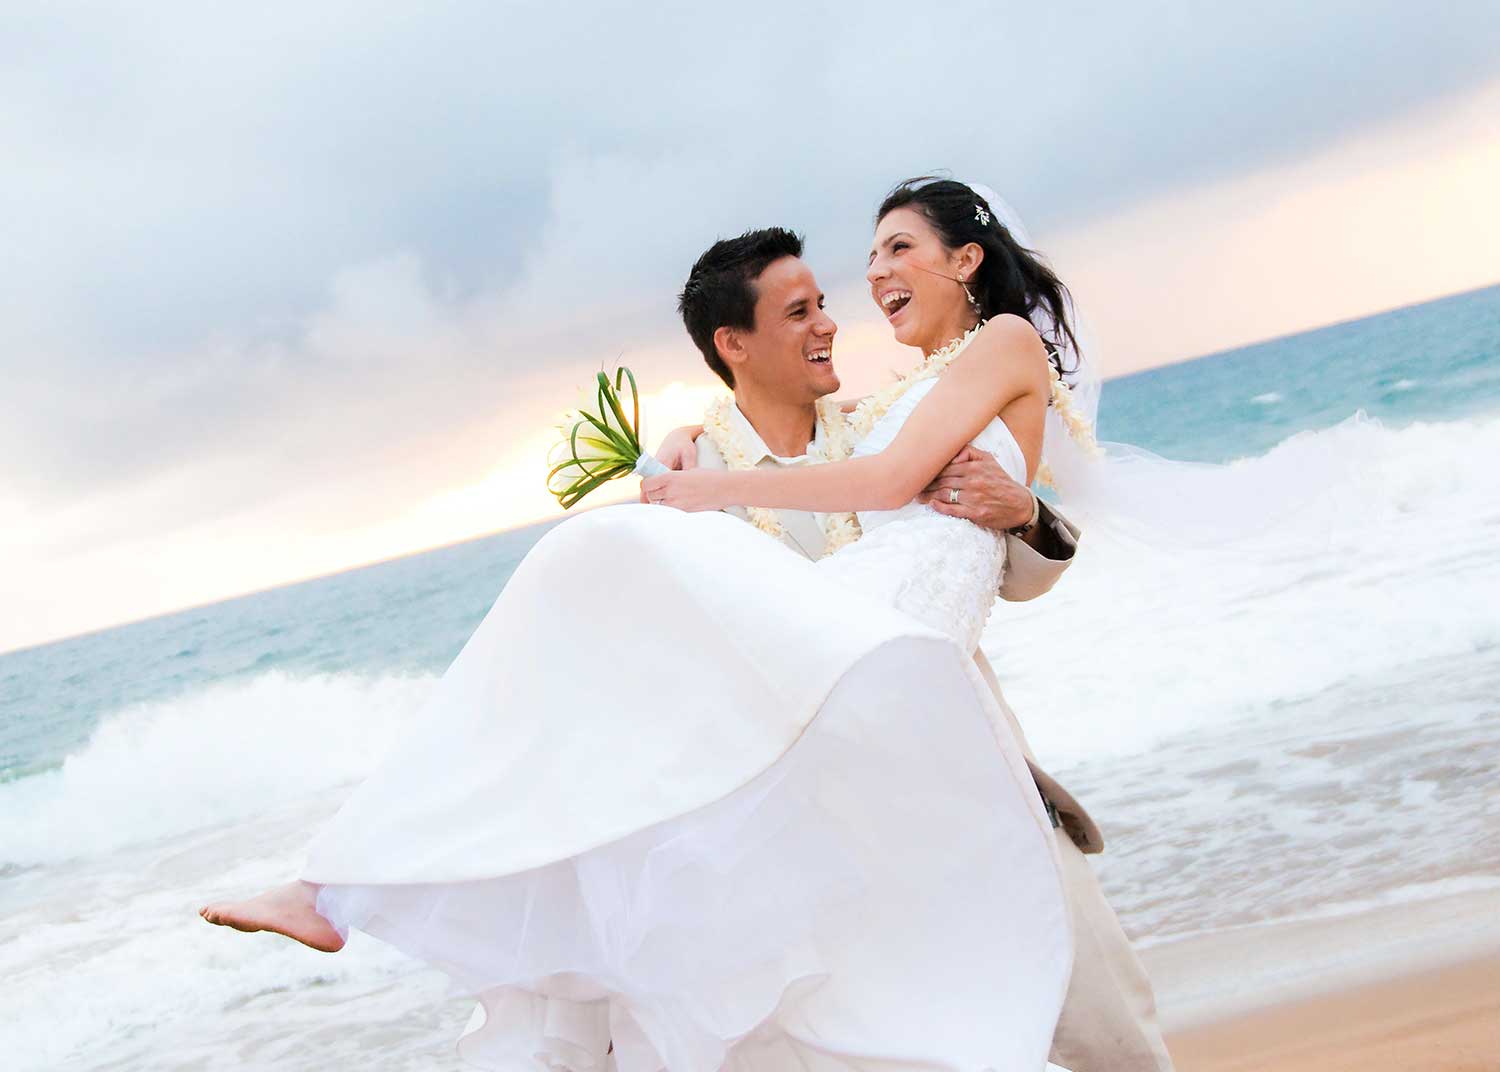 Maui's Wedding from the Heart<br />
